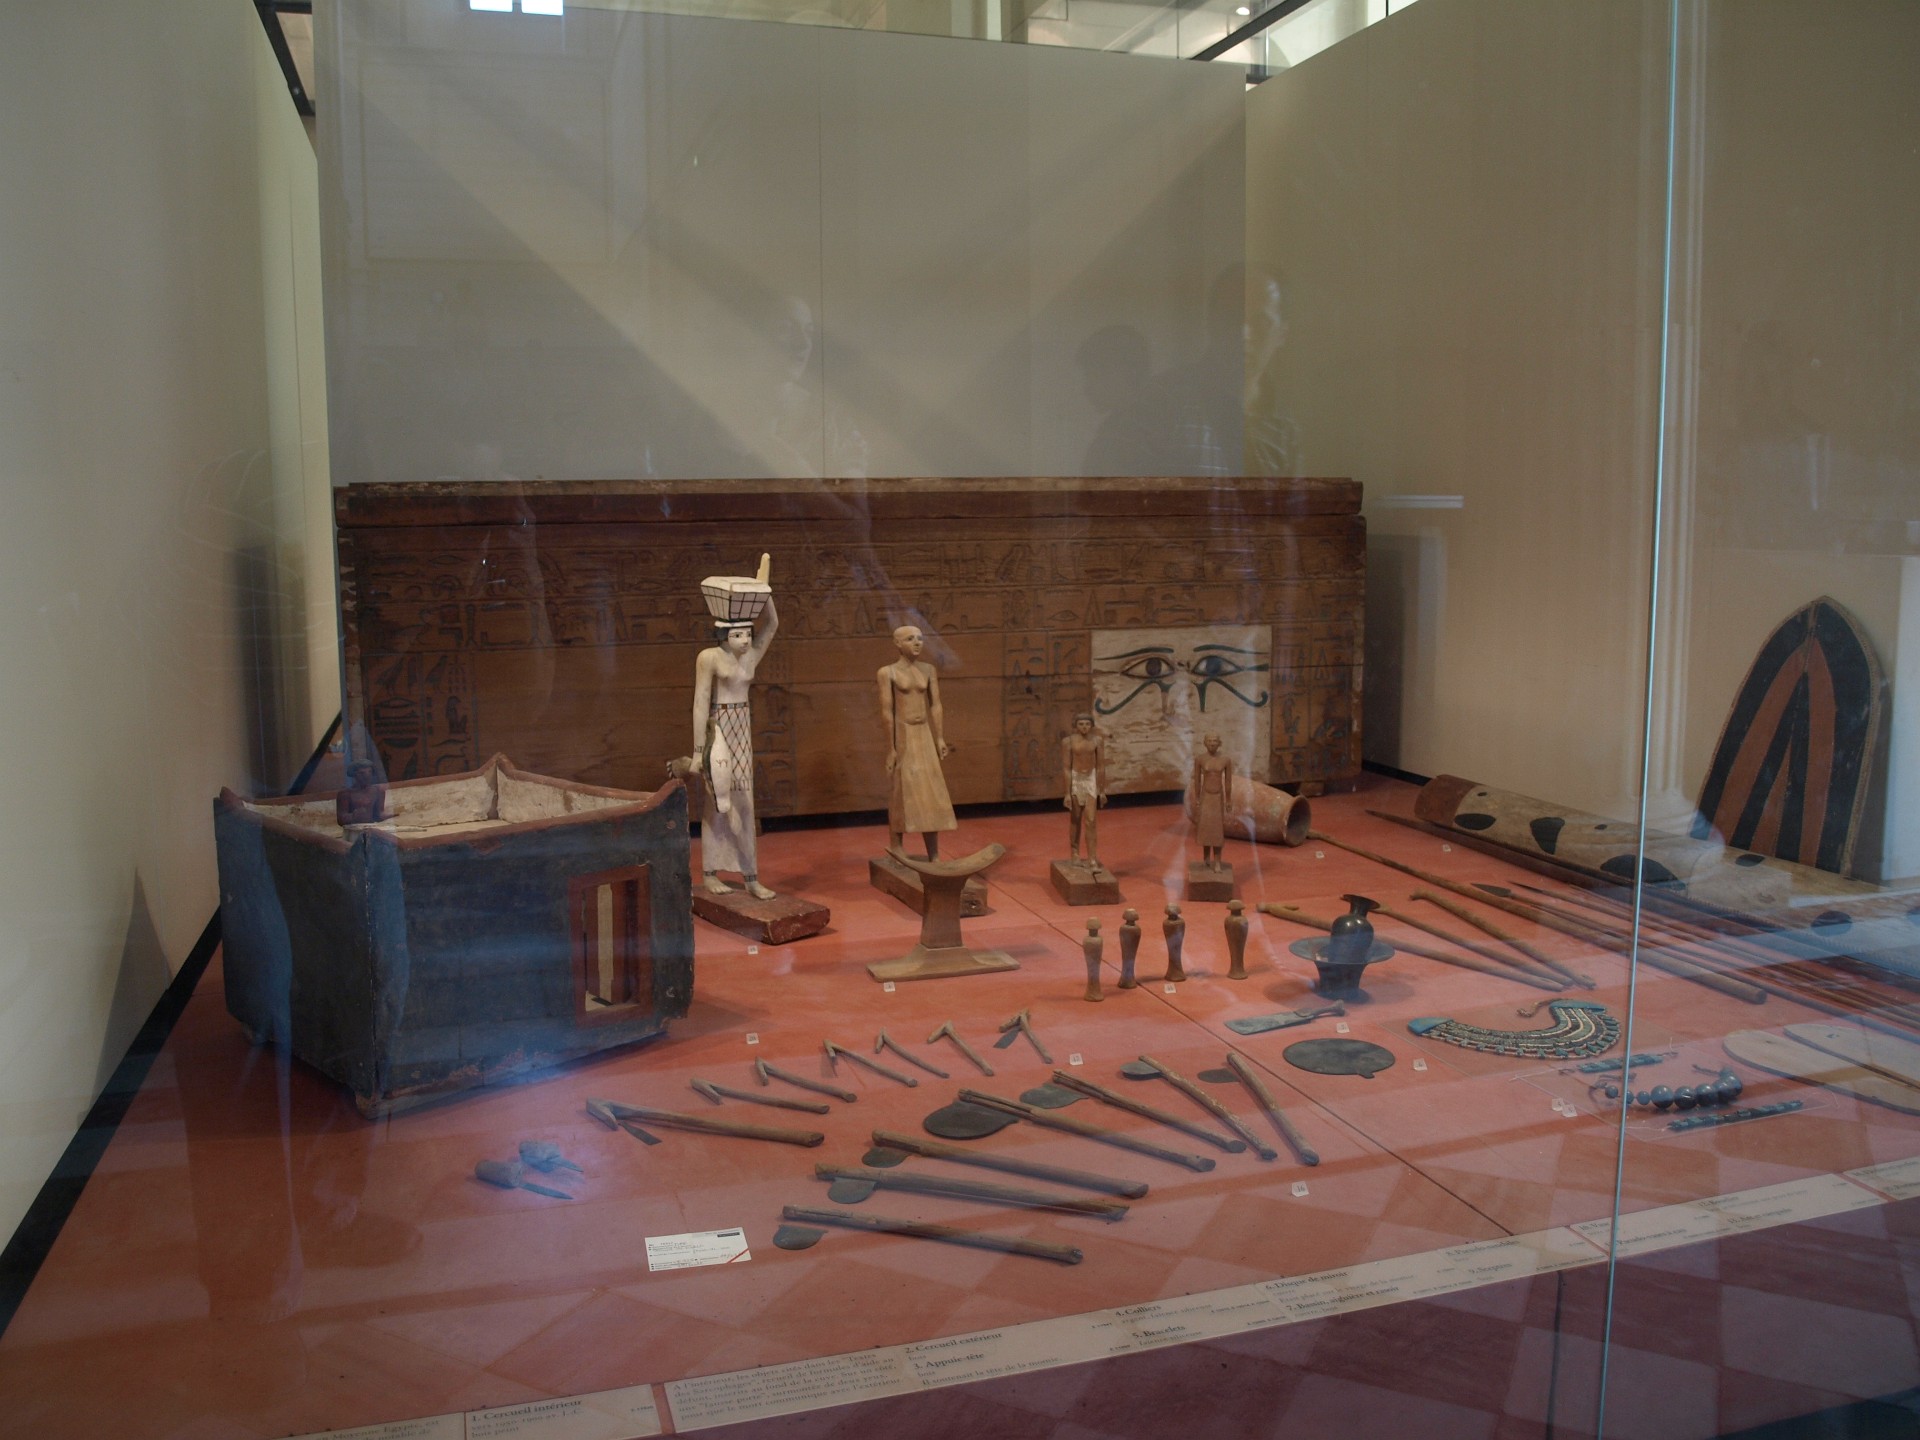 Tools, Weapons, and Implements Found in Egytian Tomb